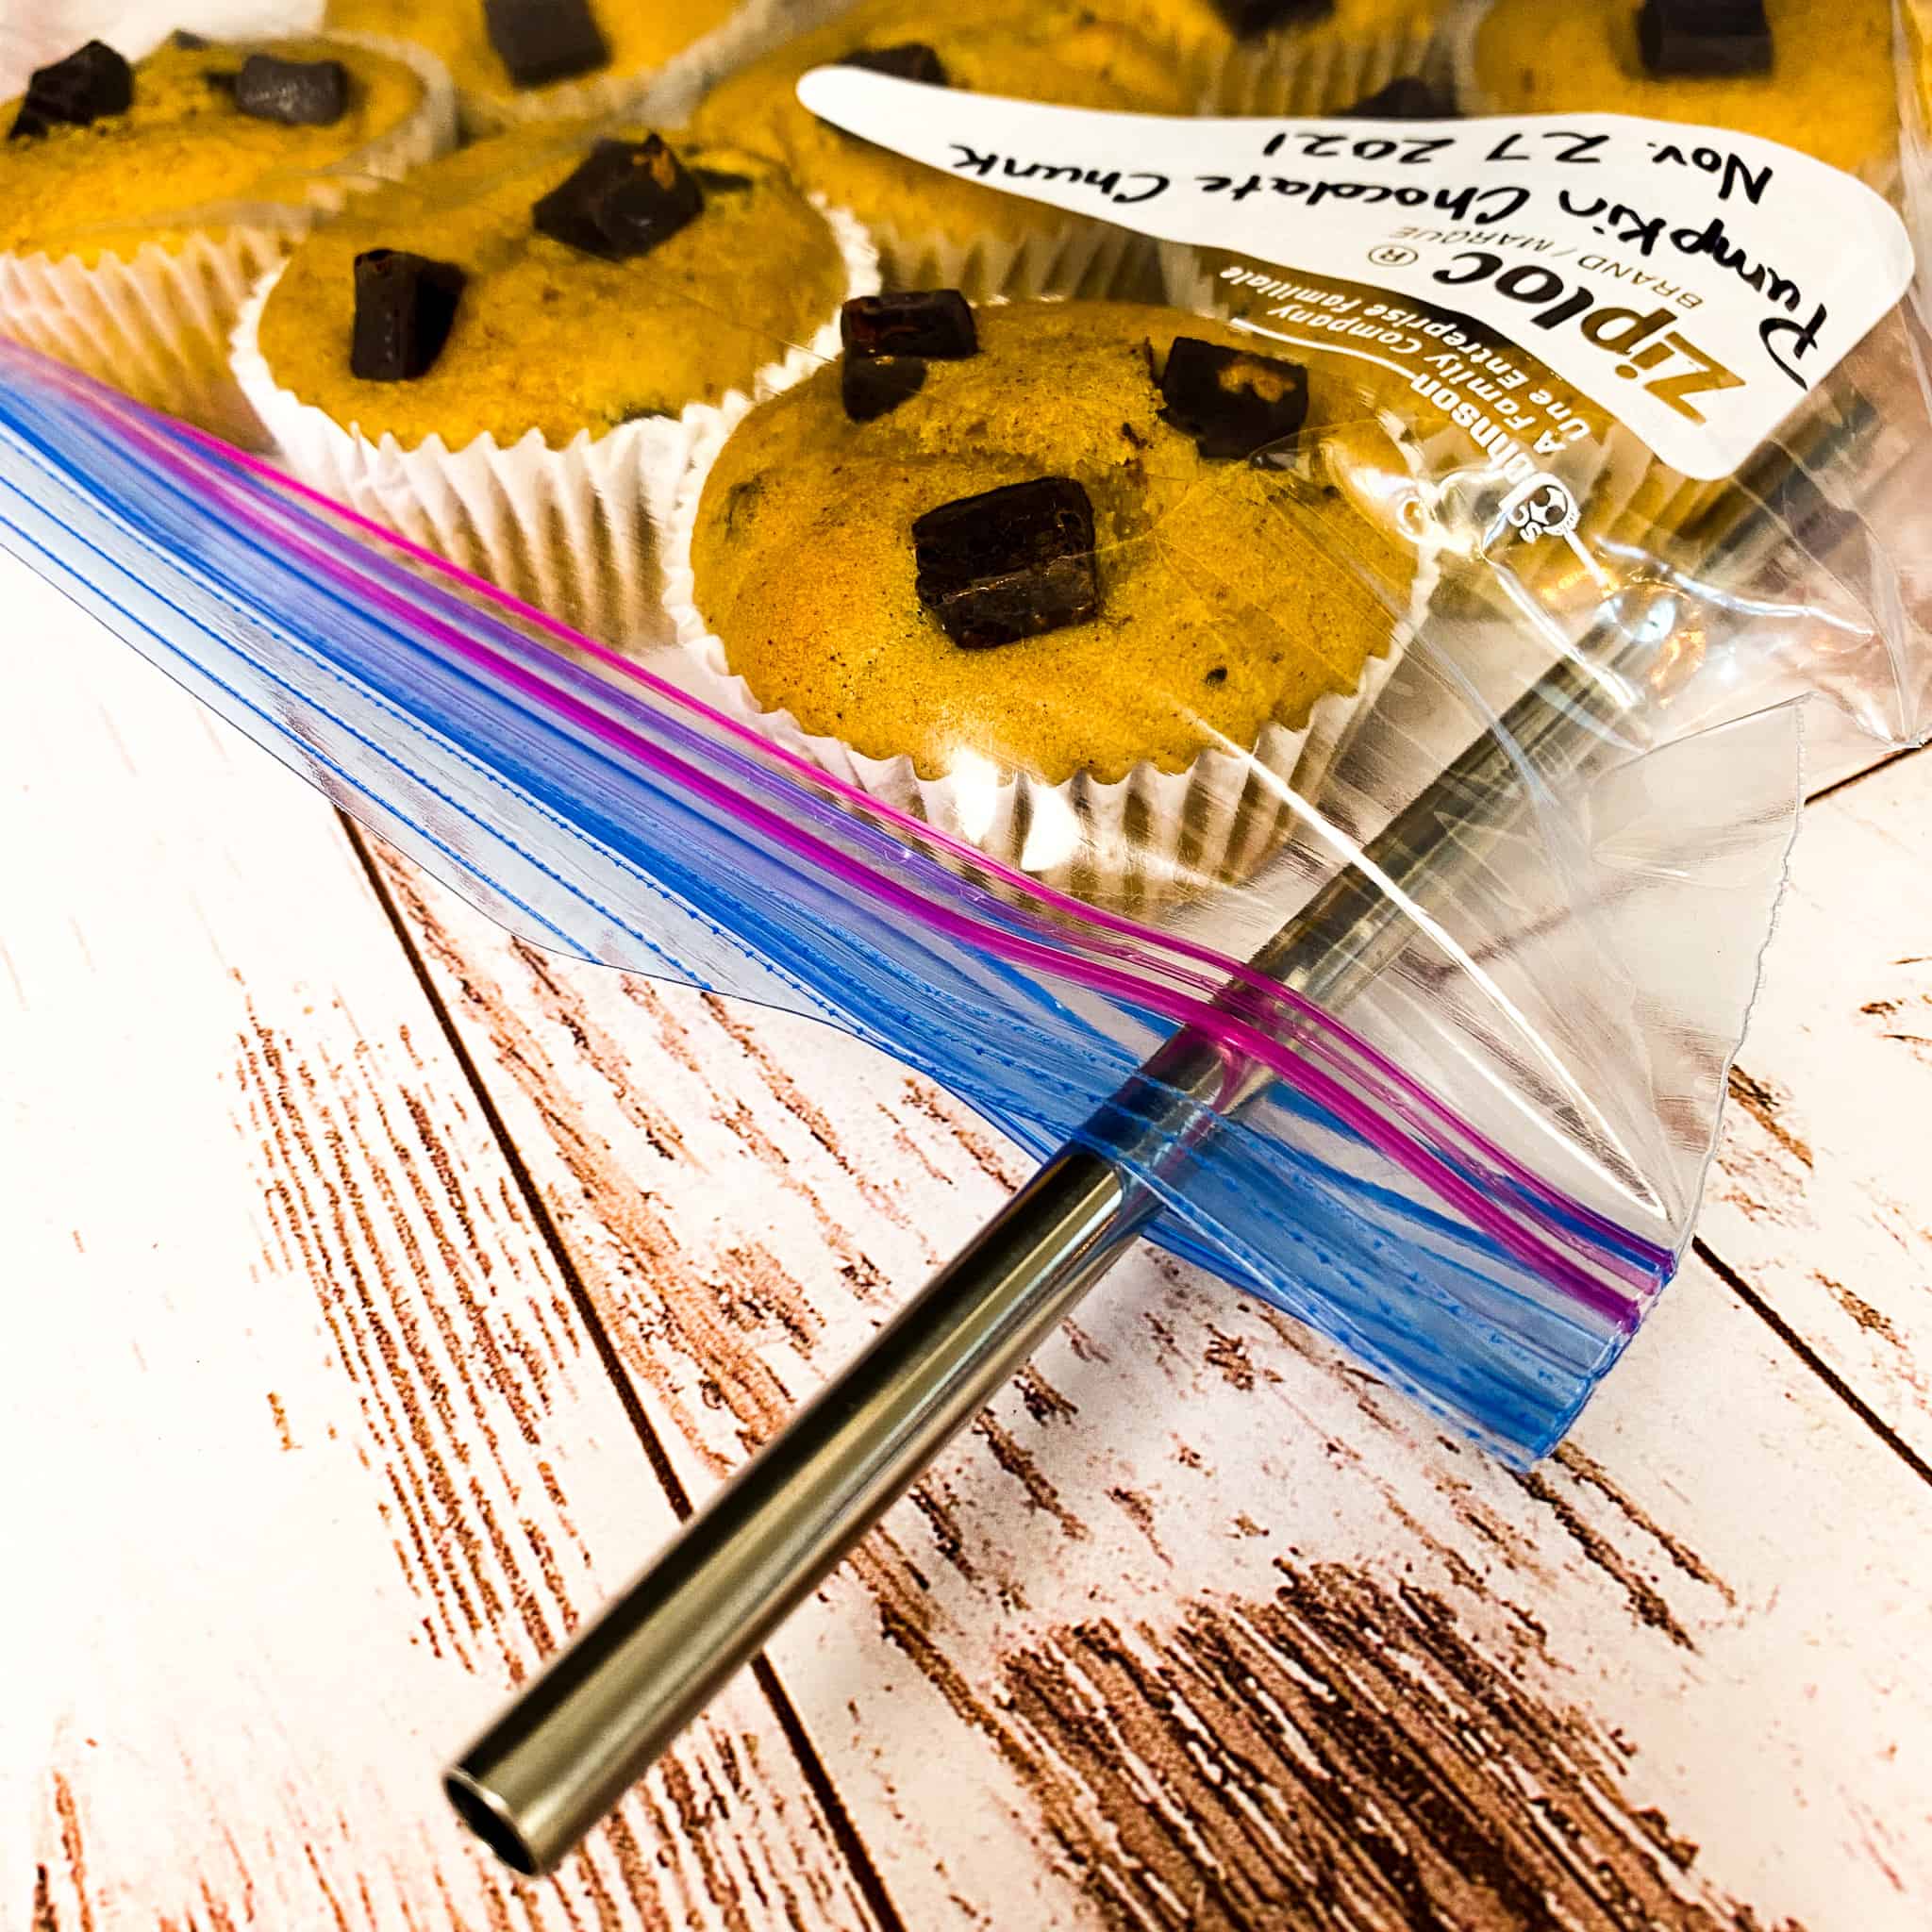 A straw inserted into a large ziplock bag full of muffins, ready to suck all of the air out.